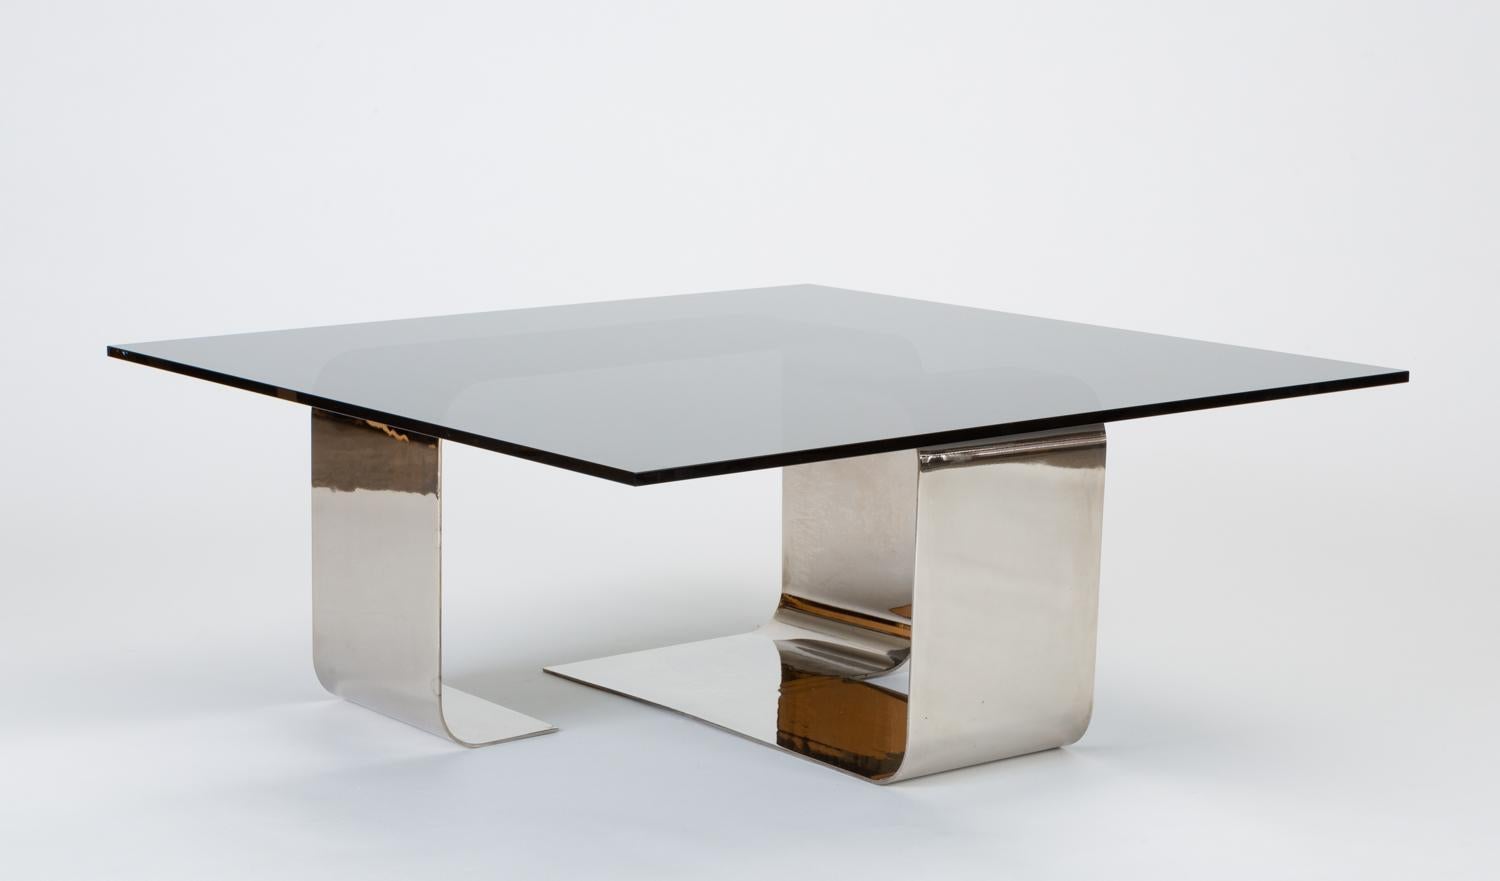 Polished Steel and Smoked Glass Coffee Table by François Monnet for Kappa 1